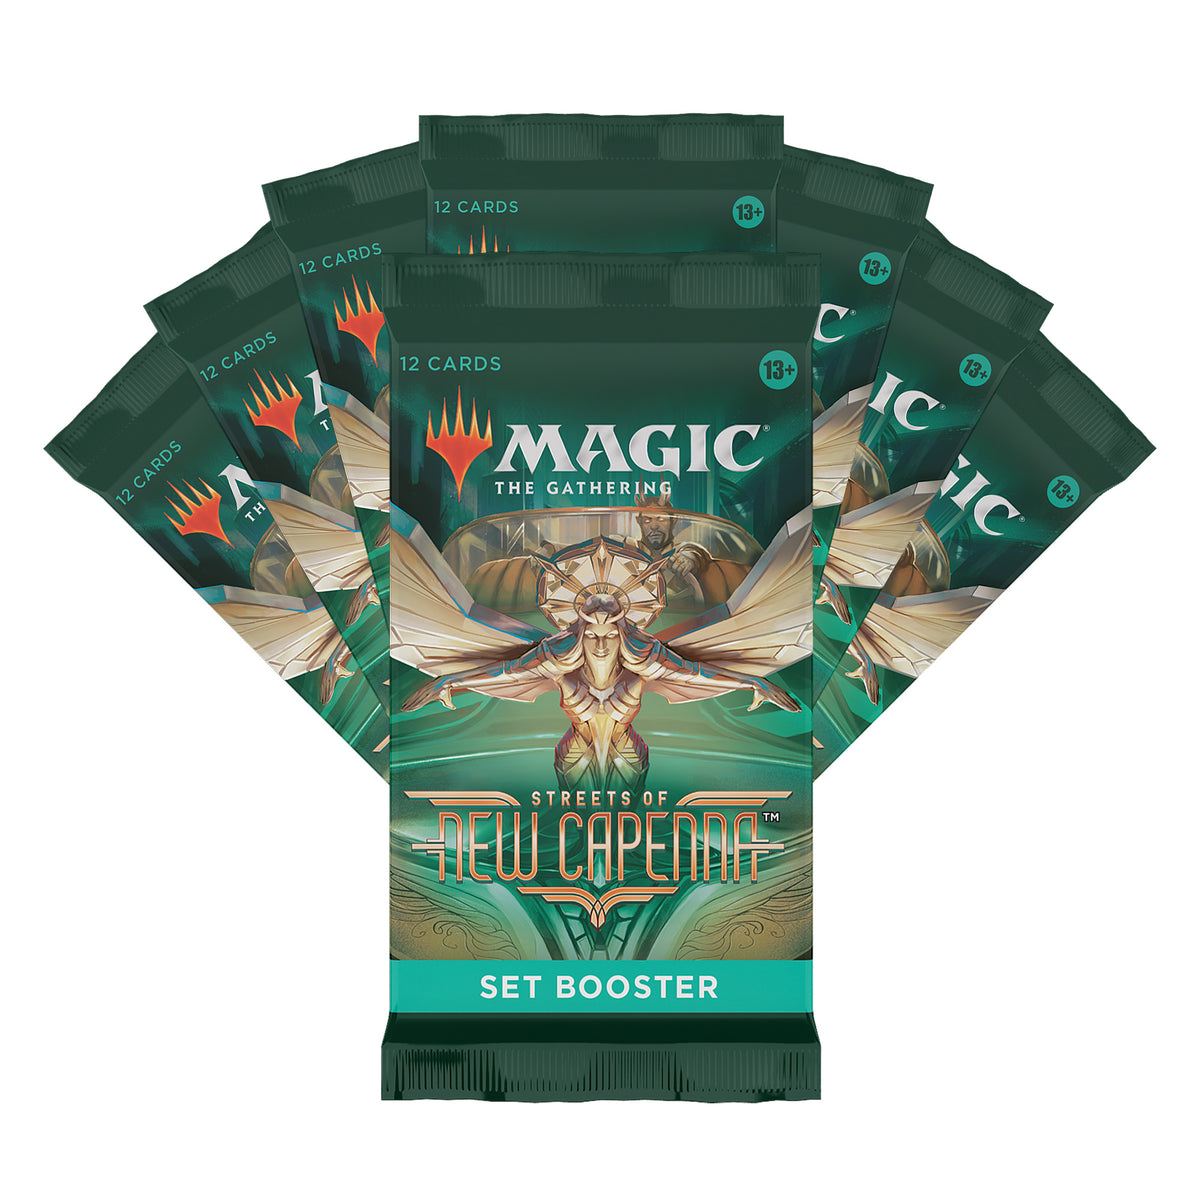 Magic the Gathering - Streets of New Capenna (Bundle Pack)